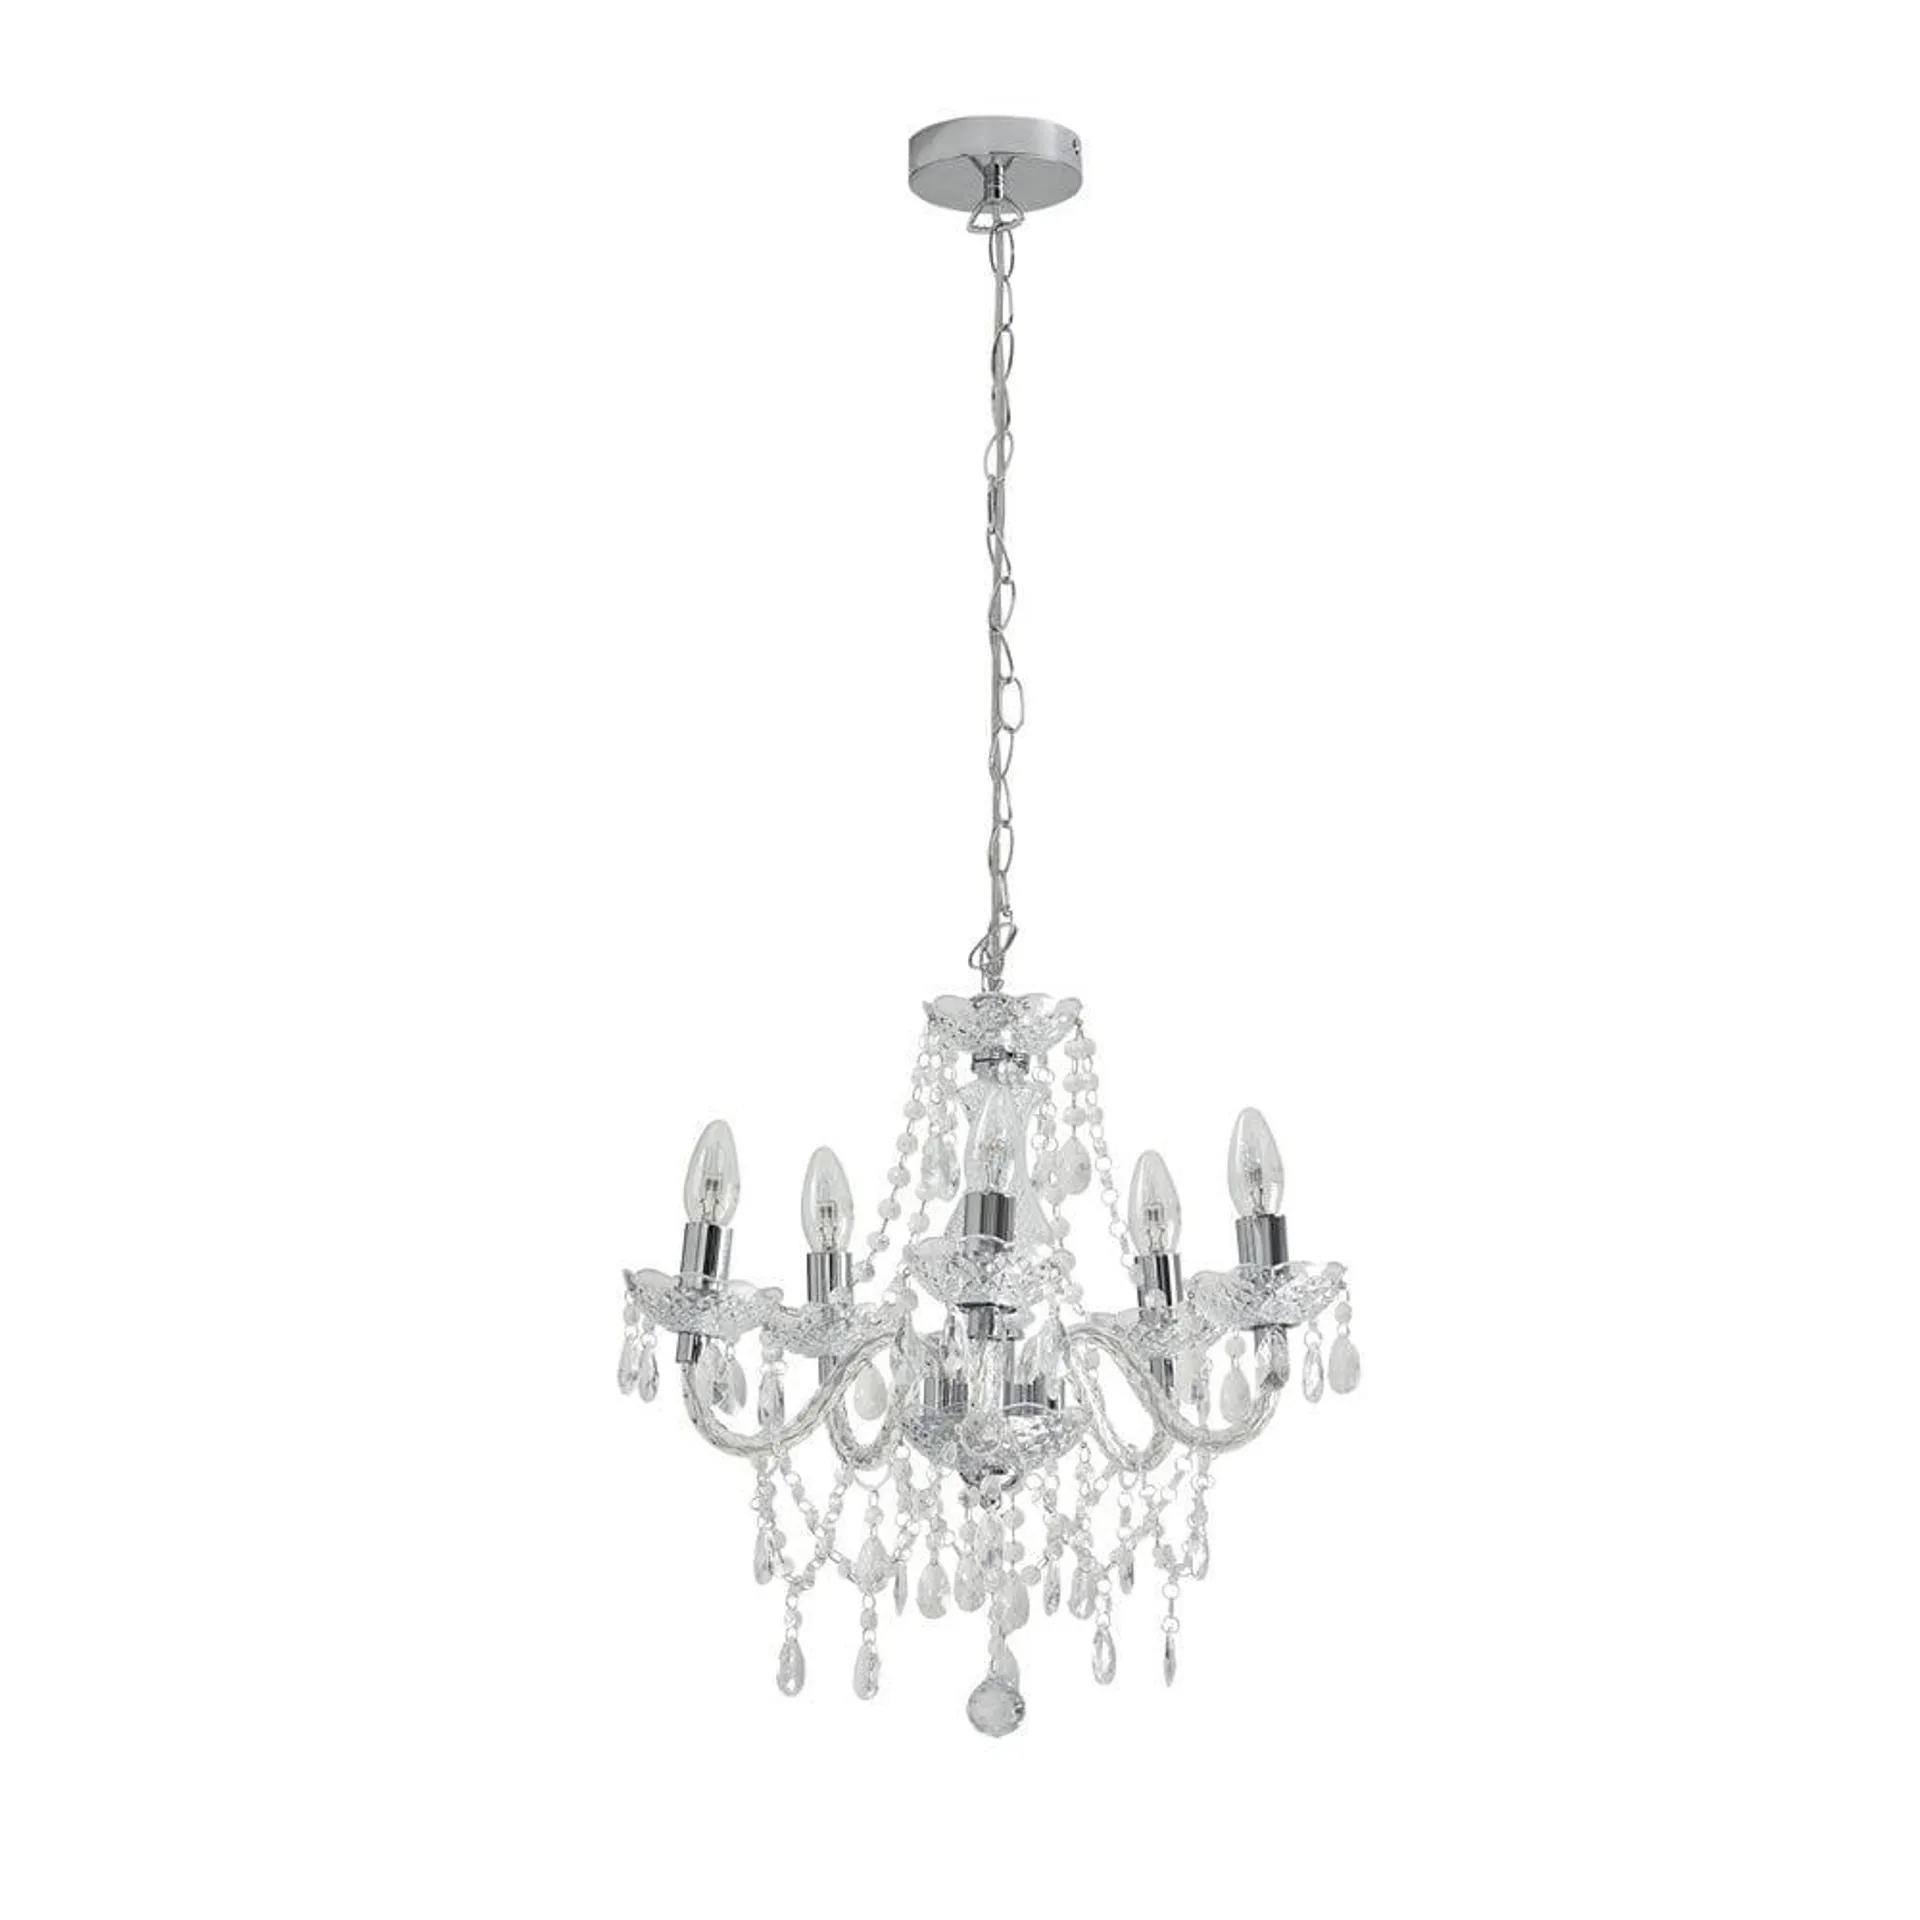 Wilko Marie Therese 5 Arm Clear Chandelier Ceiling Light